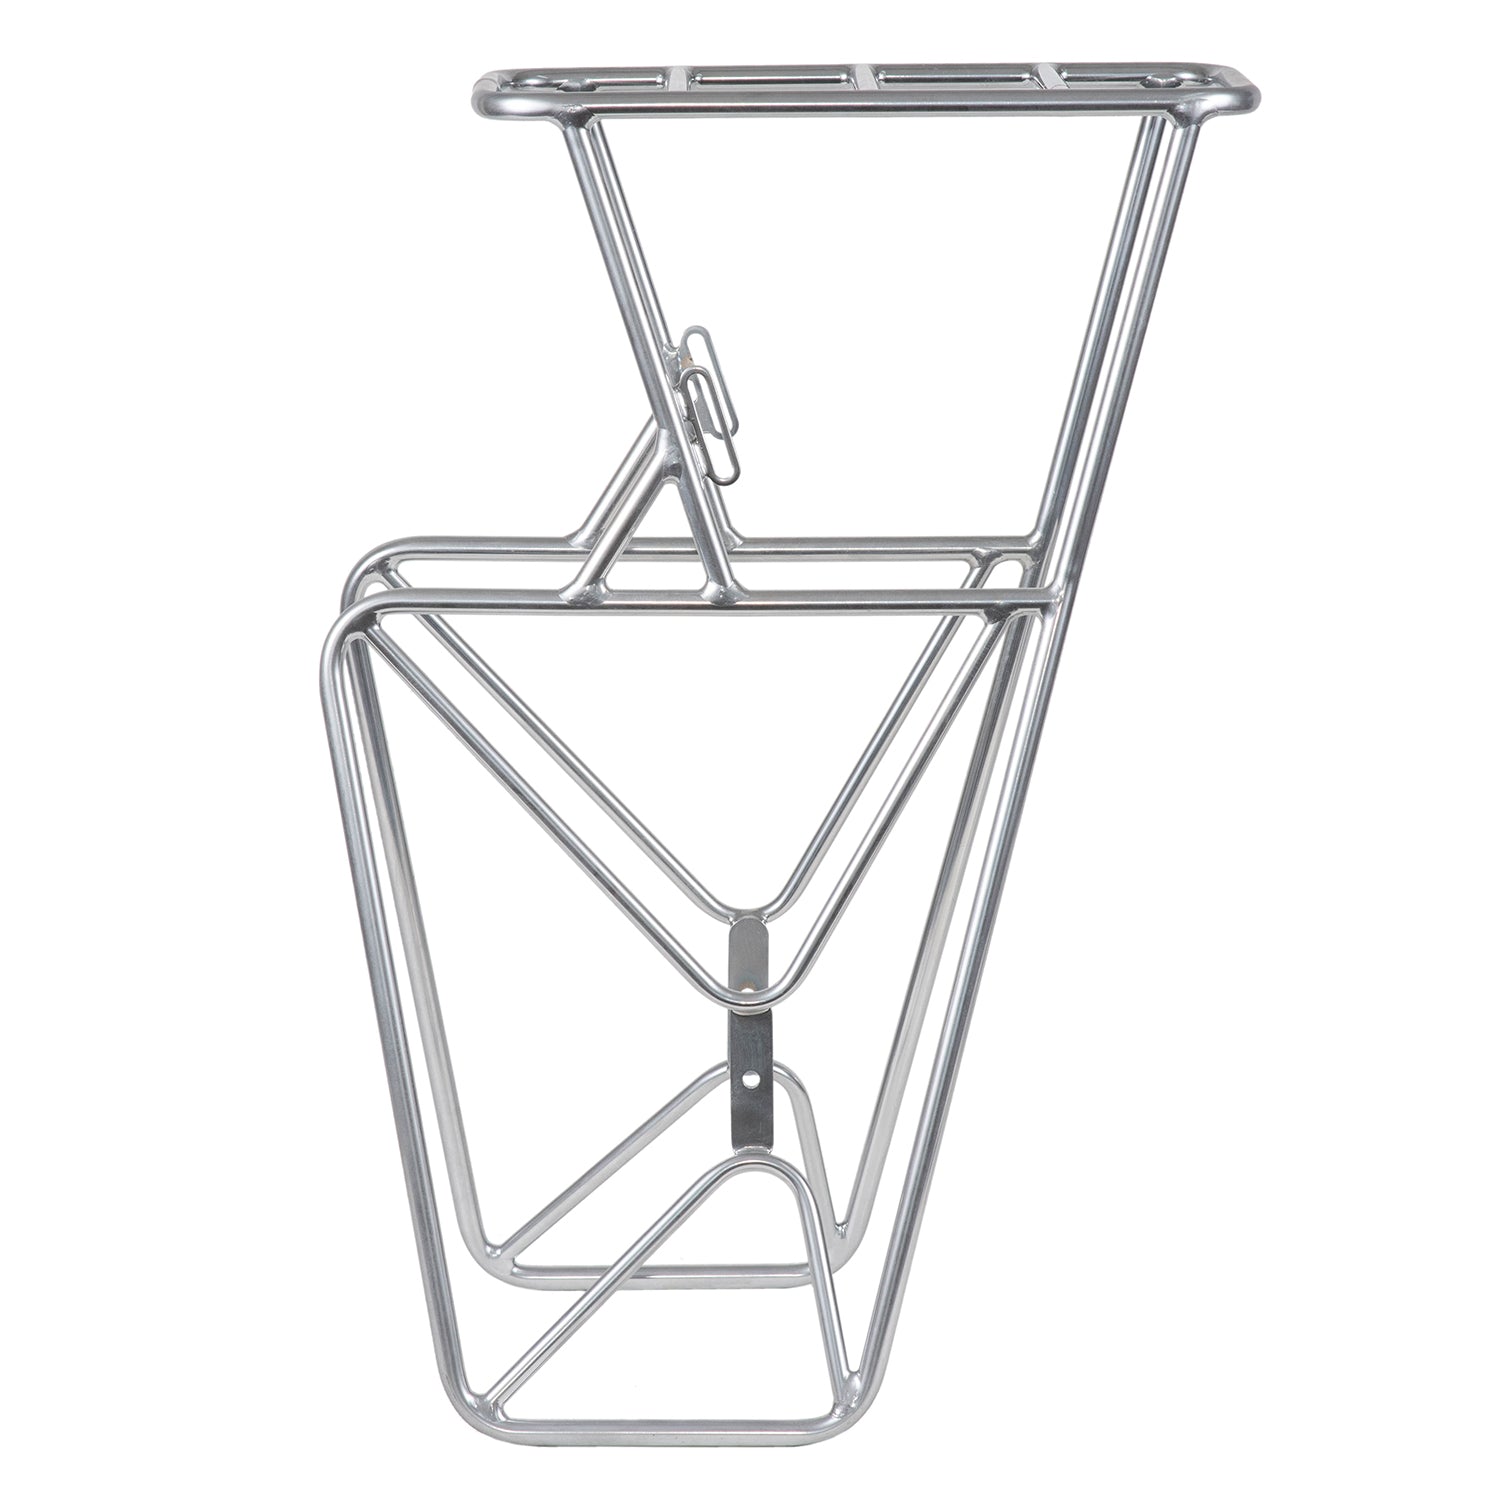 NITTO MTB Campee F-25 Front Rack